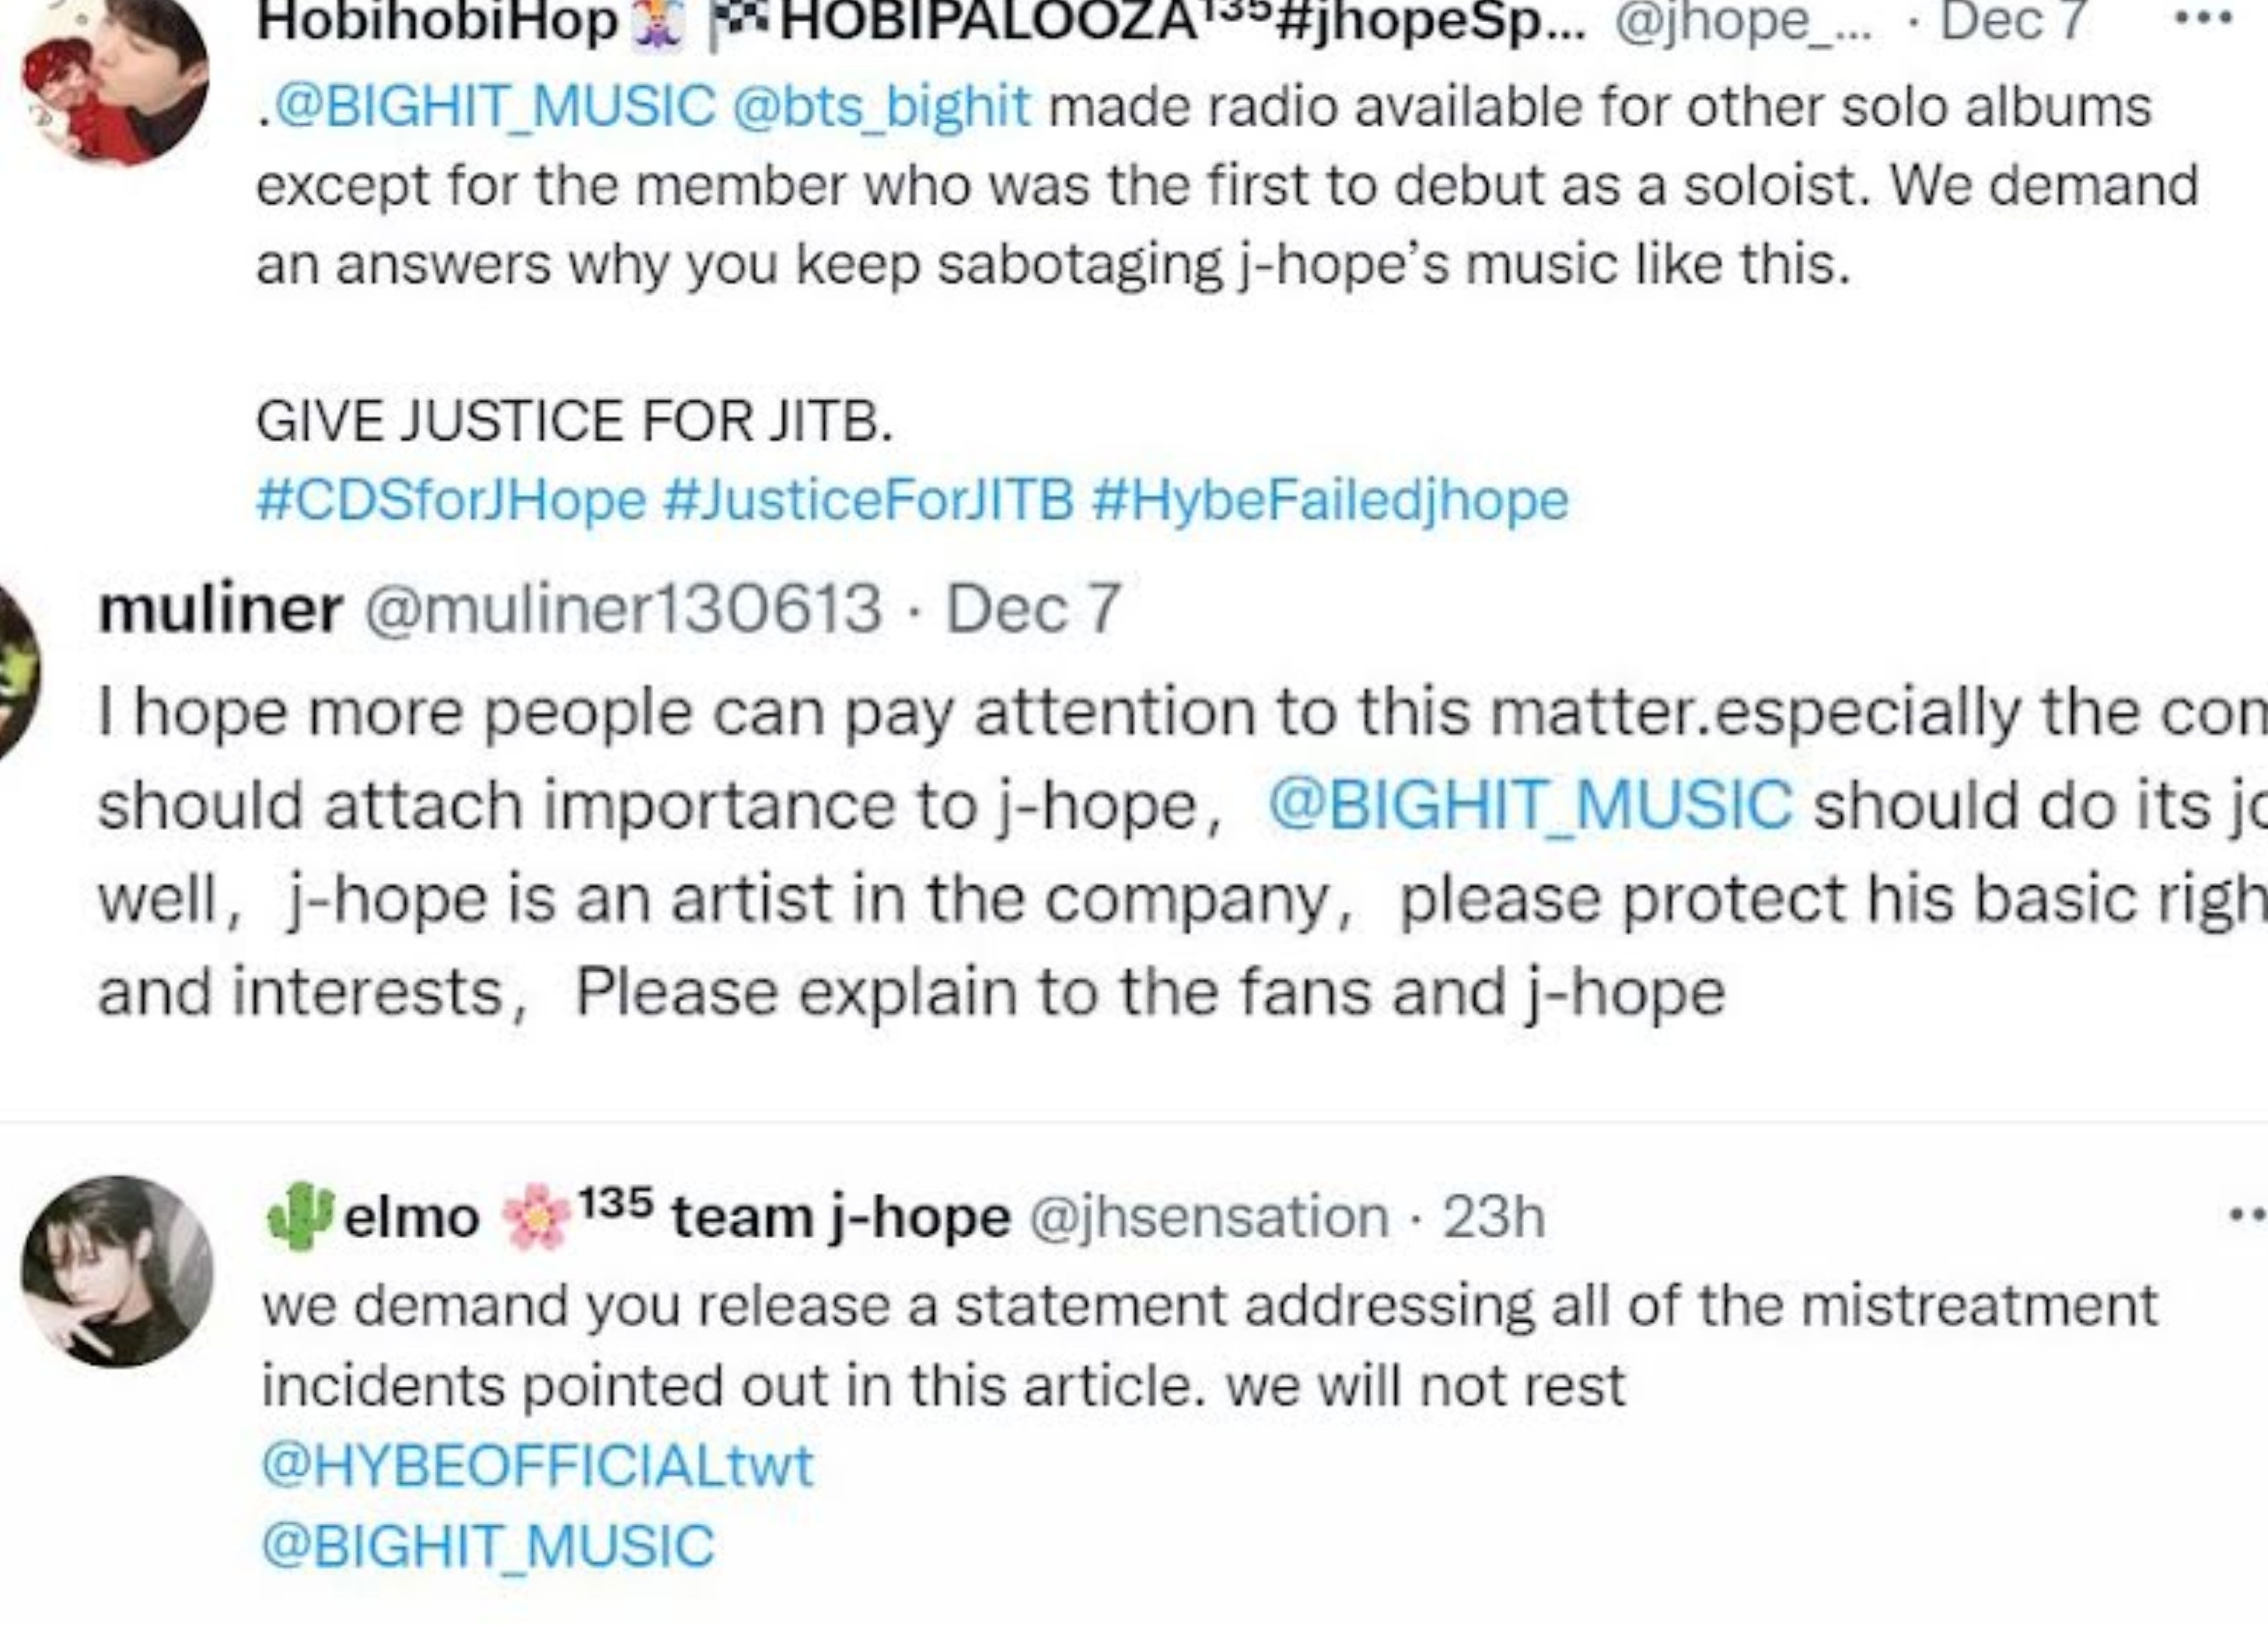 BTS ARMY raise concerns over HYBEs mistreatment of J-hope